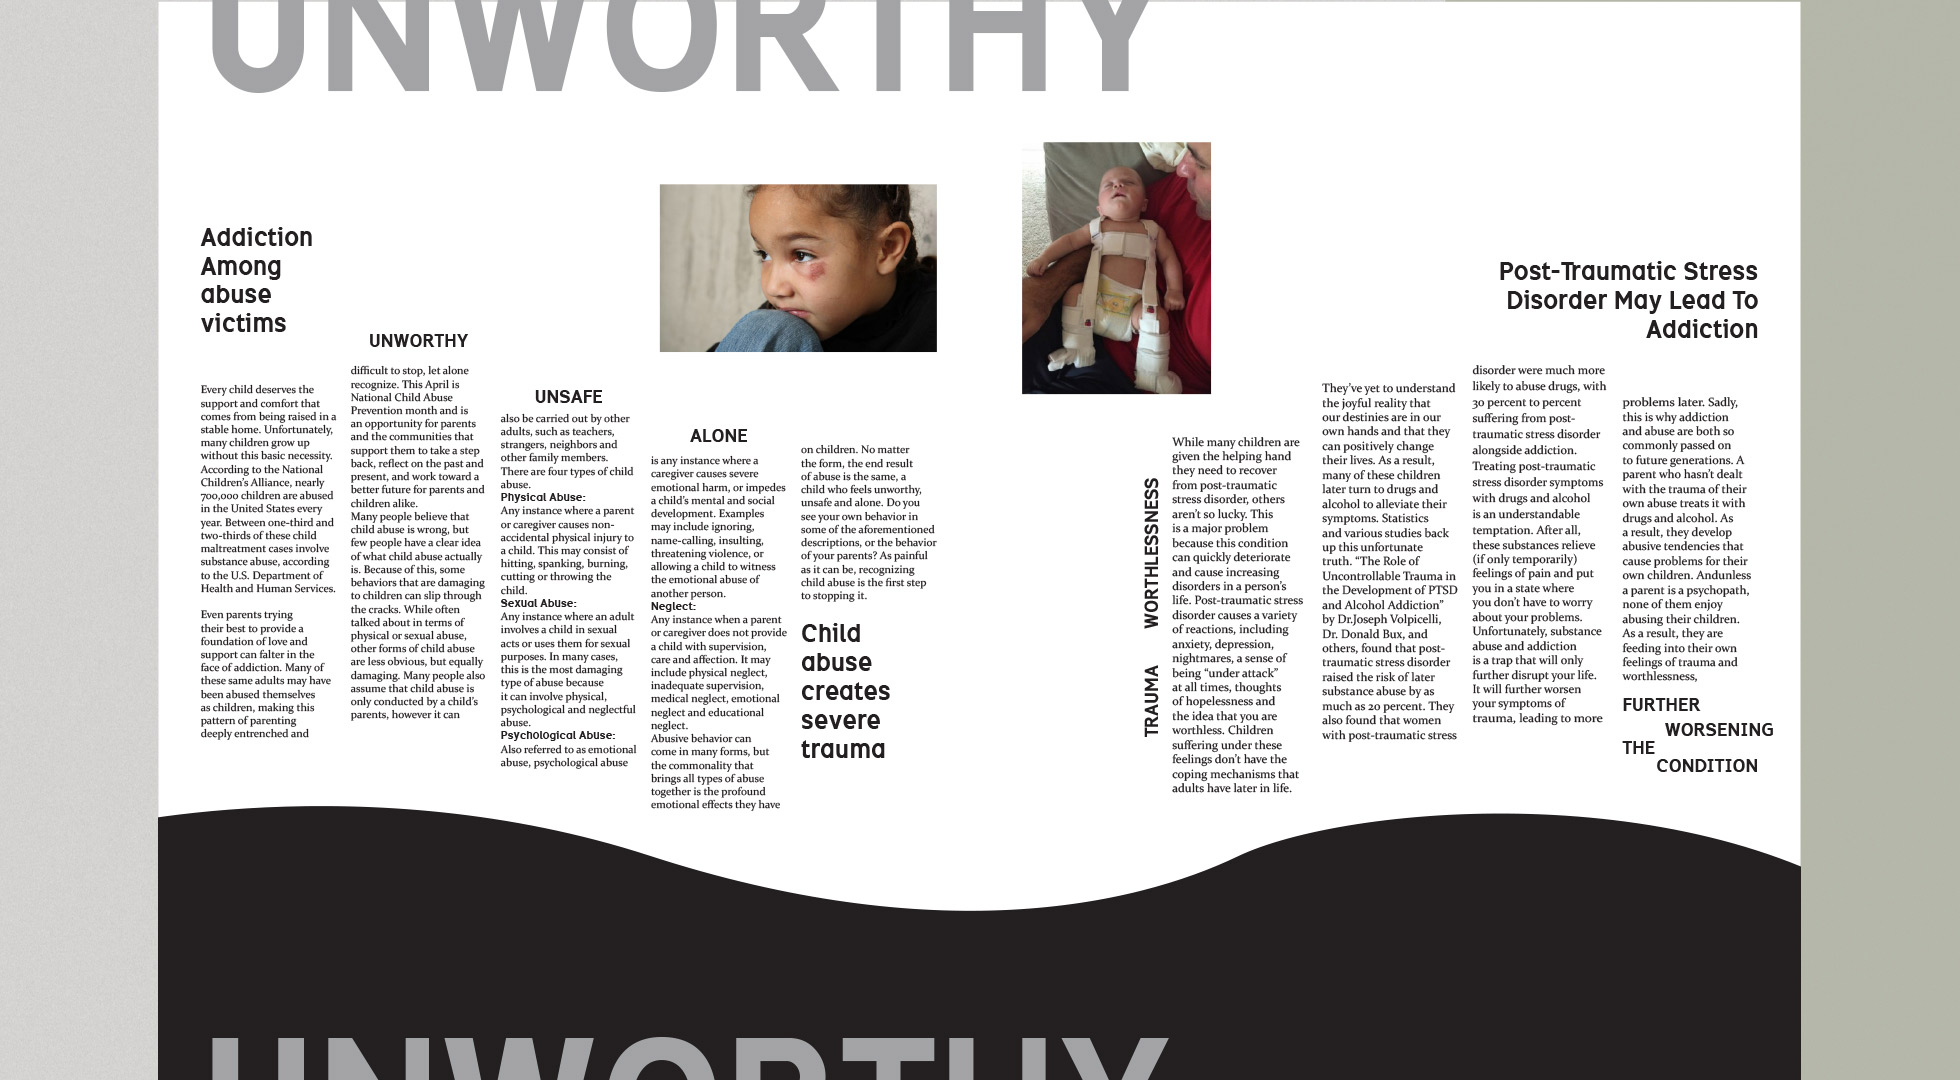 Editorial design about child and drug abuse with shocking images.